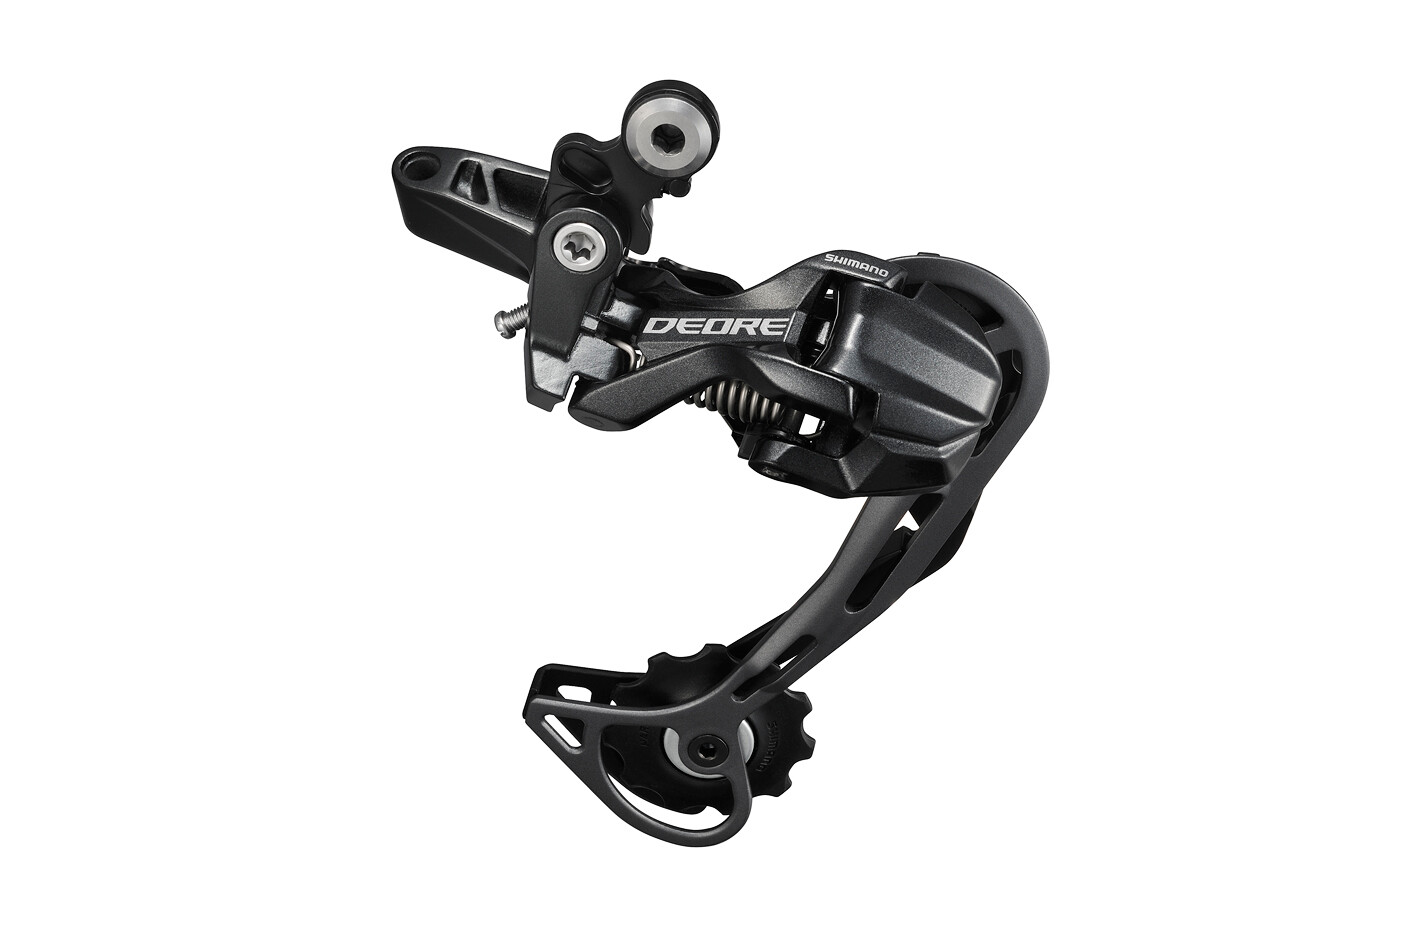 Shimano Bremsscheibe mit Ice-Tech + Dyna-Sys Technologie